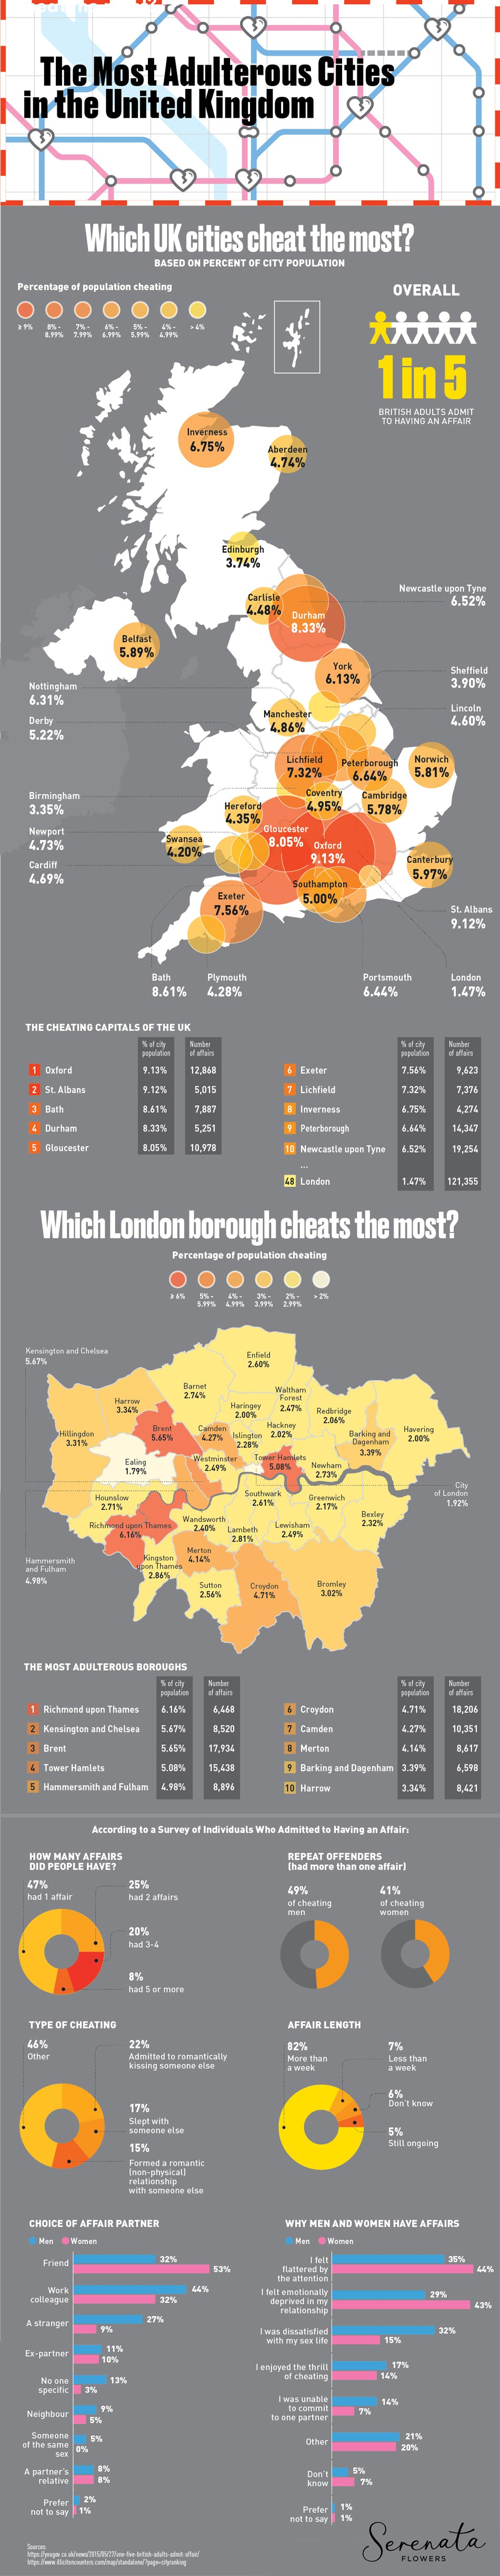 Most Adulterous Cities in the UK